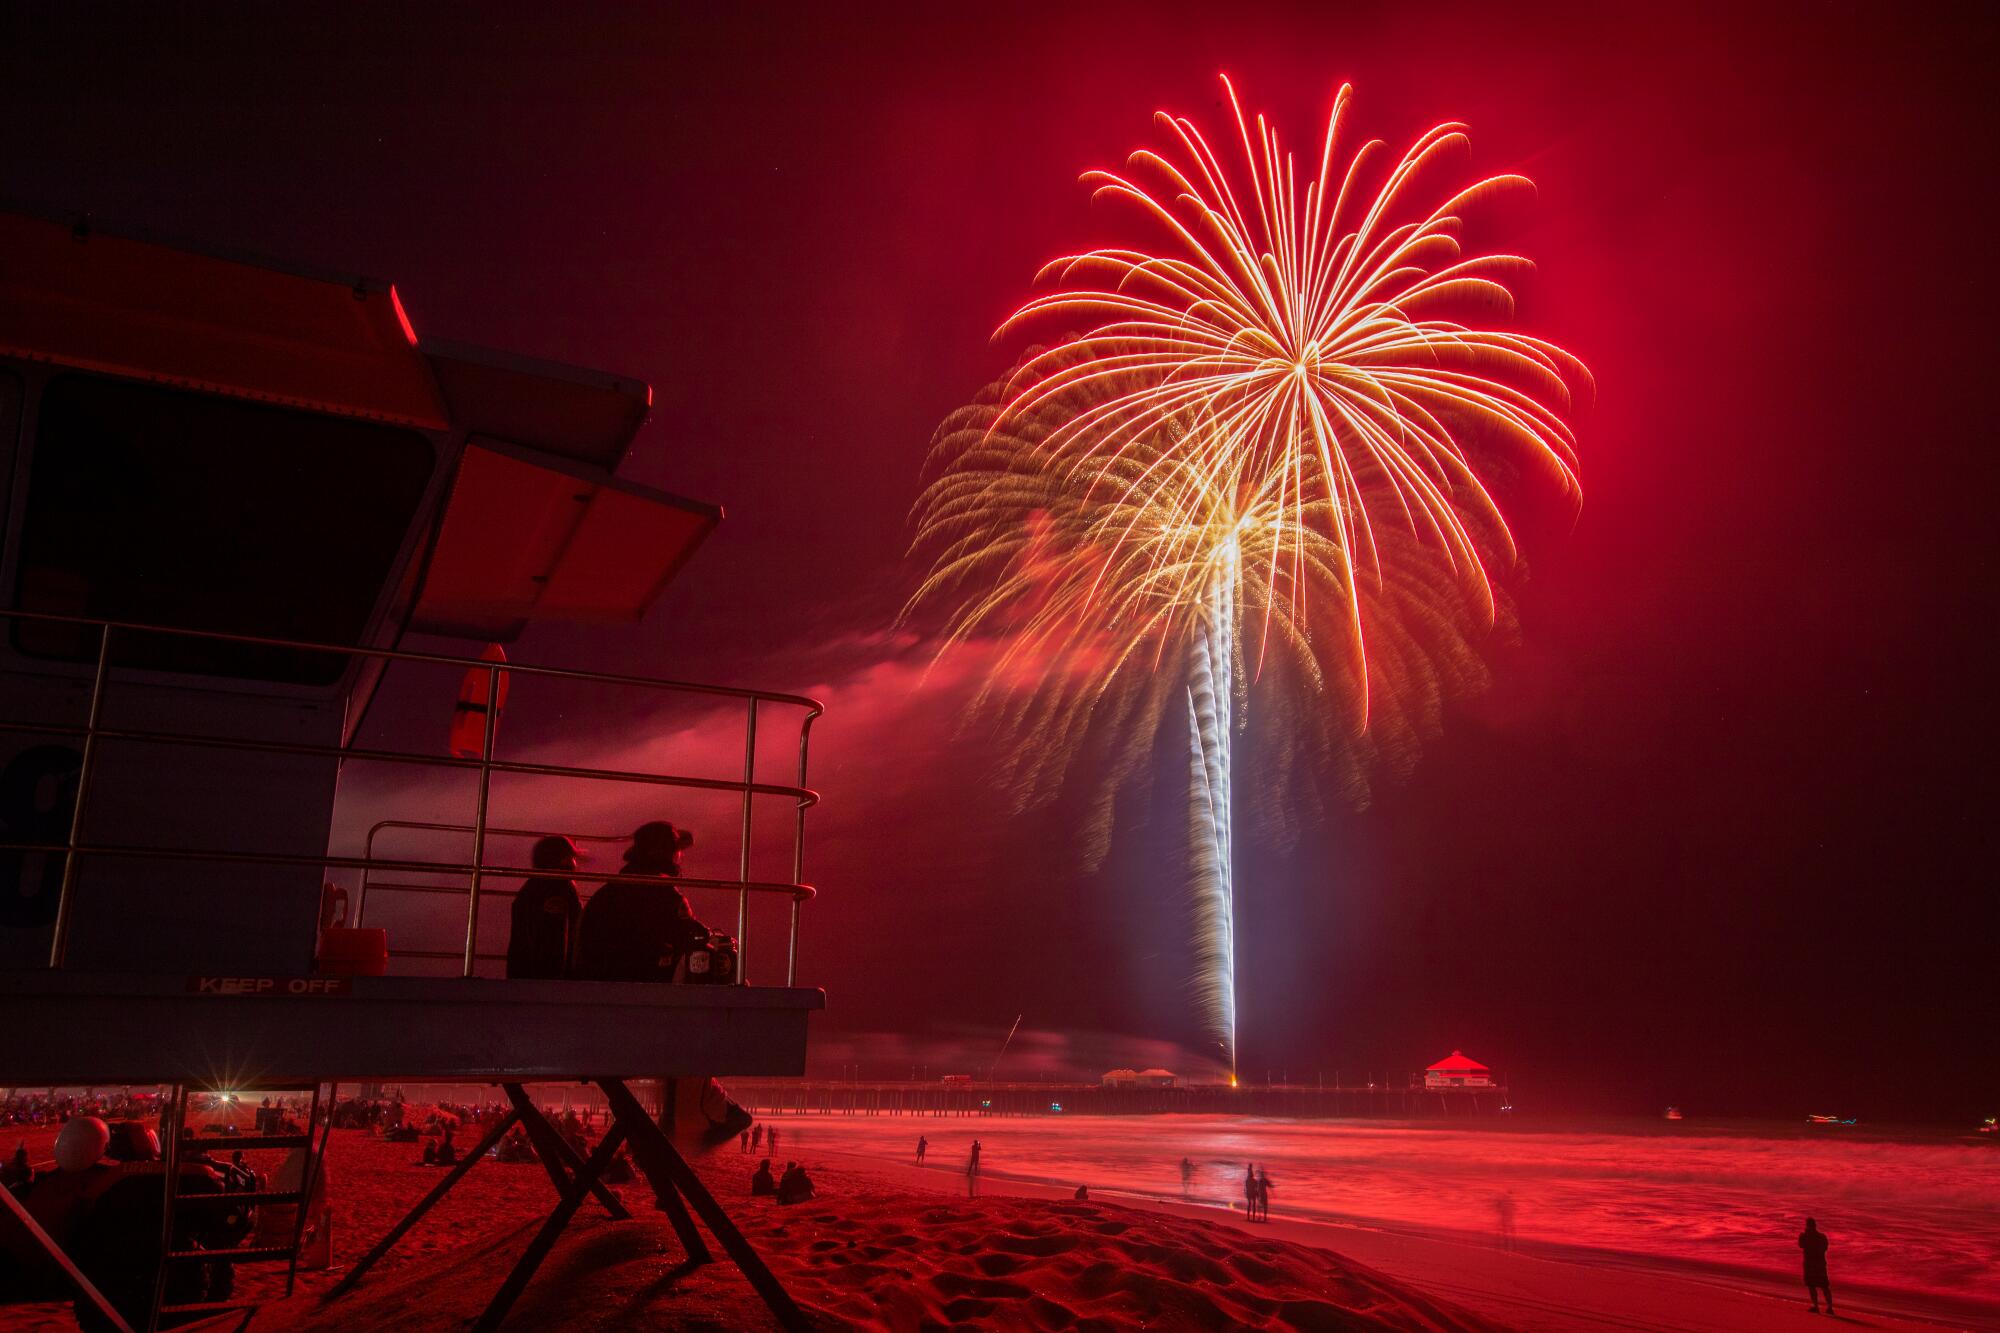 Two people sitting at a lifeguard tower watch a shower of pink and orange sparks from fireworks over the ocean